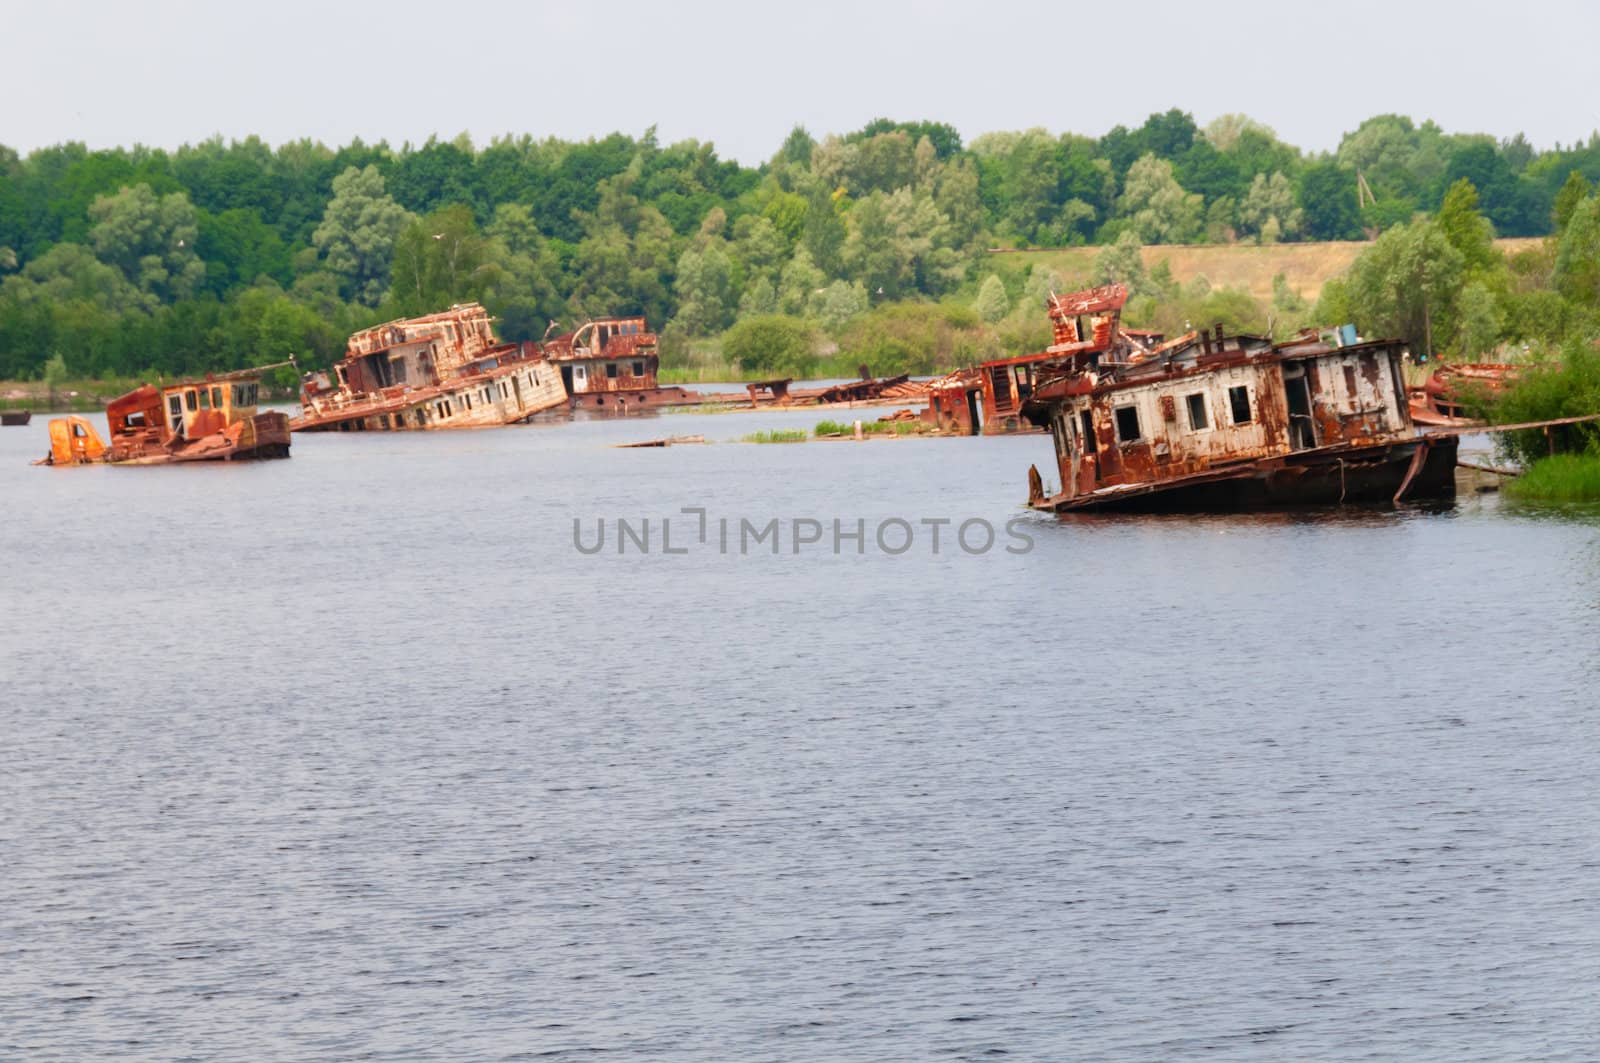 Many wrecked abandoned ship on a river after nuclear disaster in Chernobyl, Ukraine